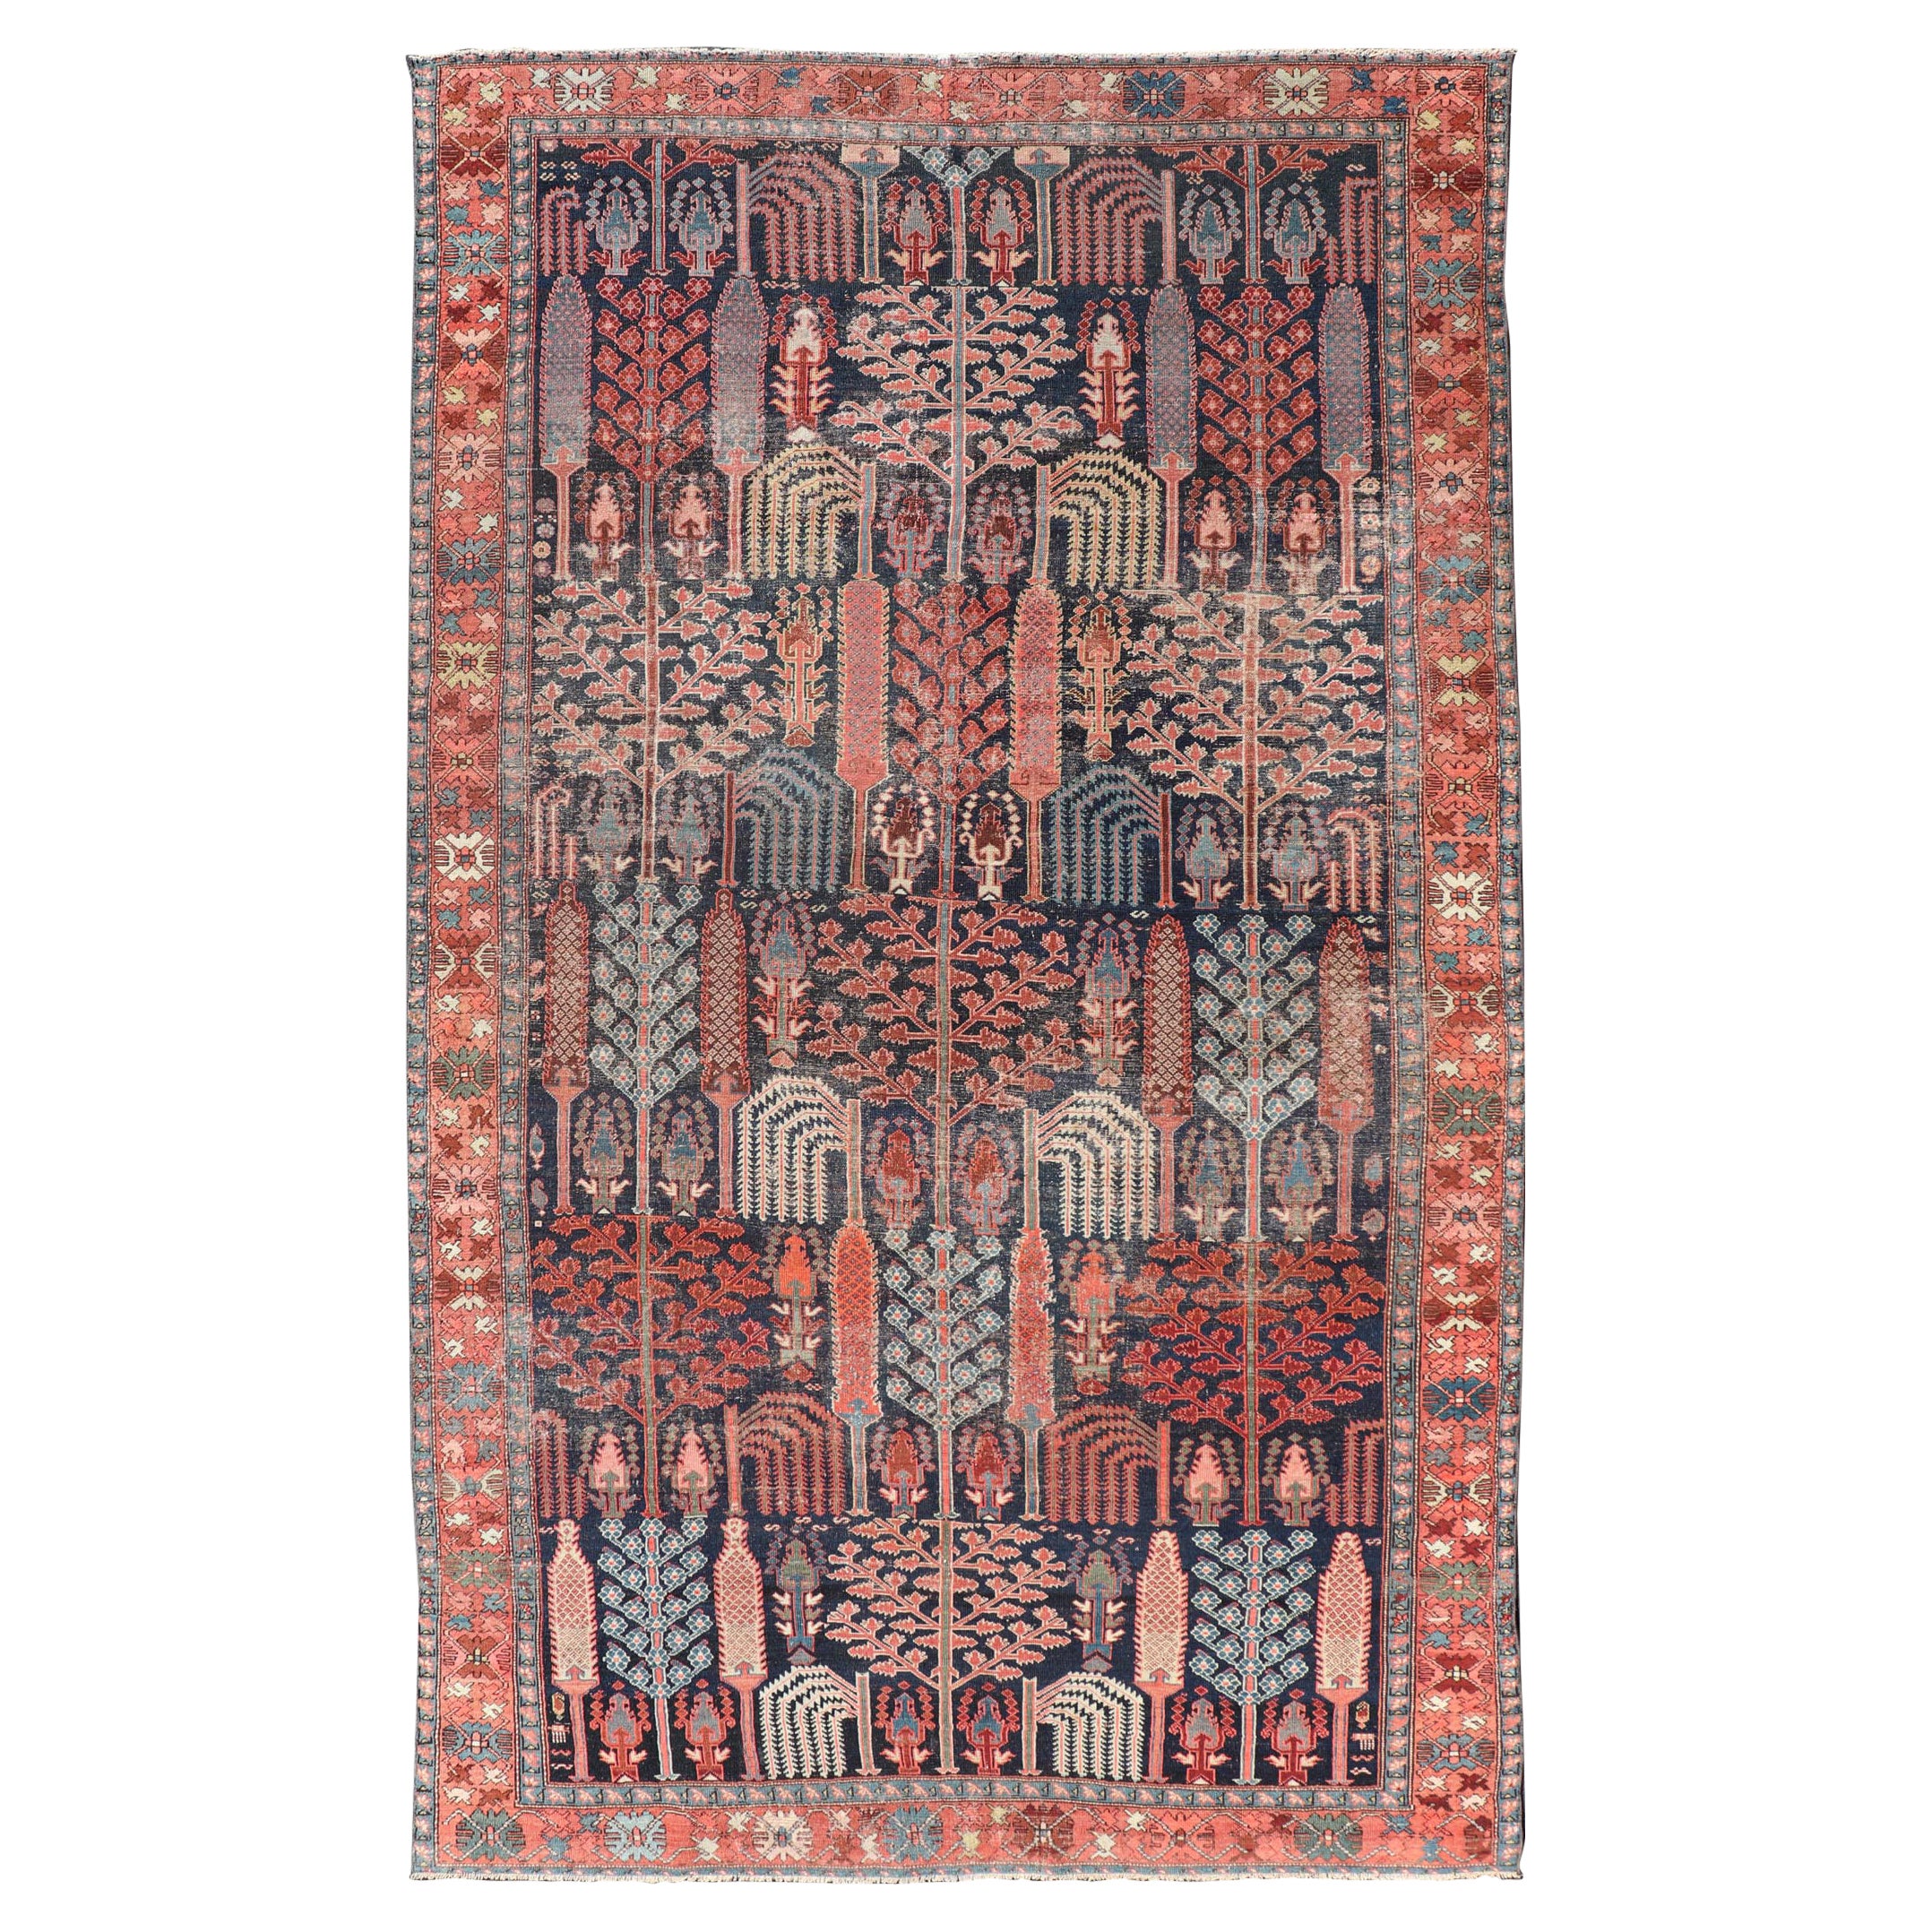 Antique Persian Bakhshaish Rug with All-Over Tree and Willow Design For Sale